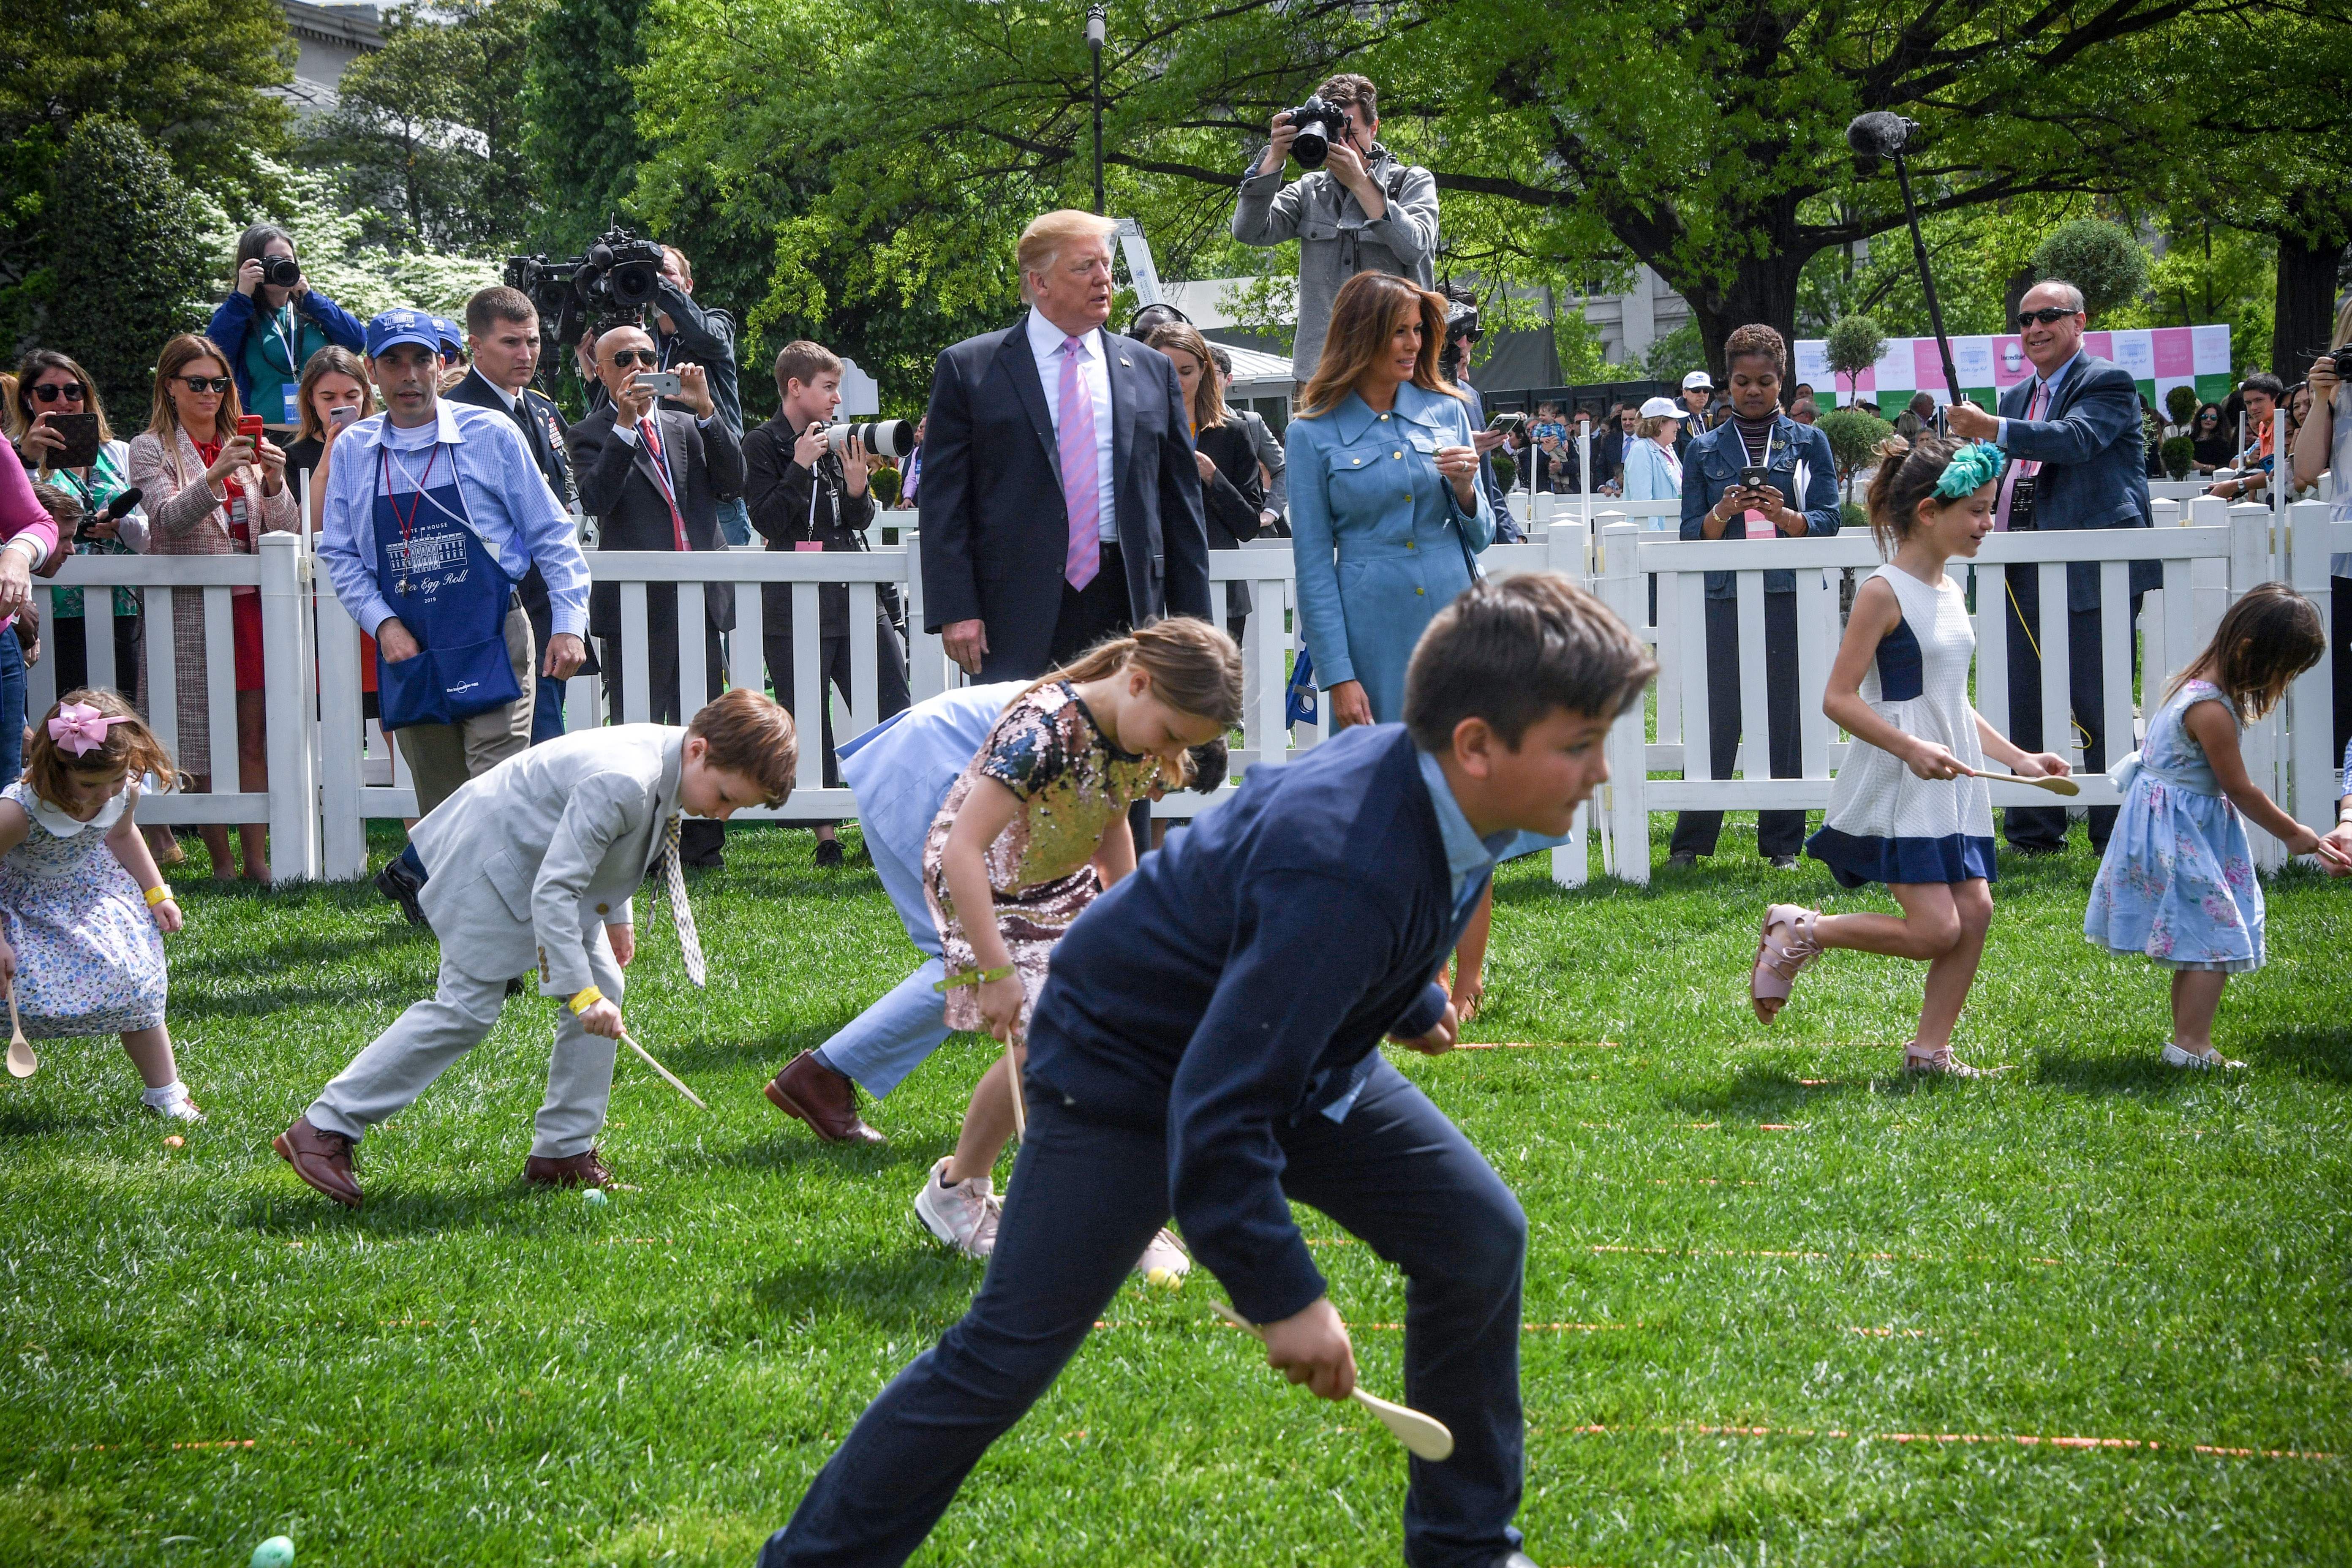 Trump nd Melania on the south lawn watching the easter egg roll